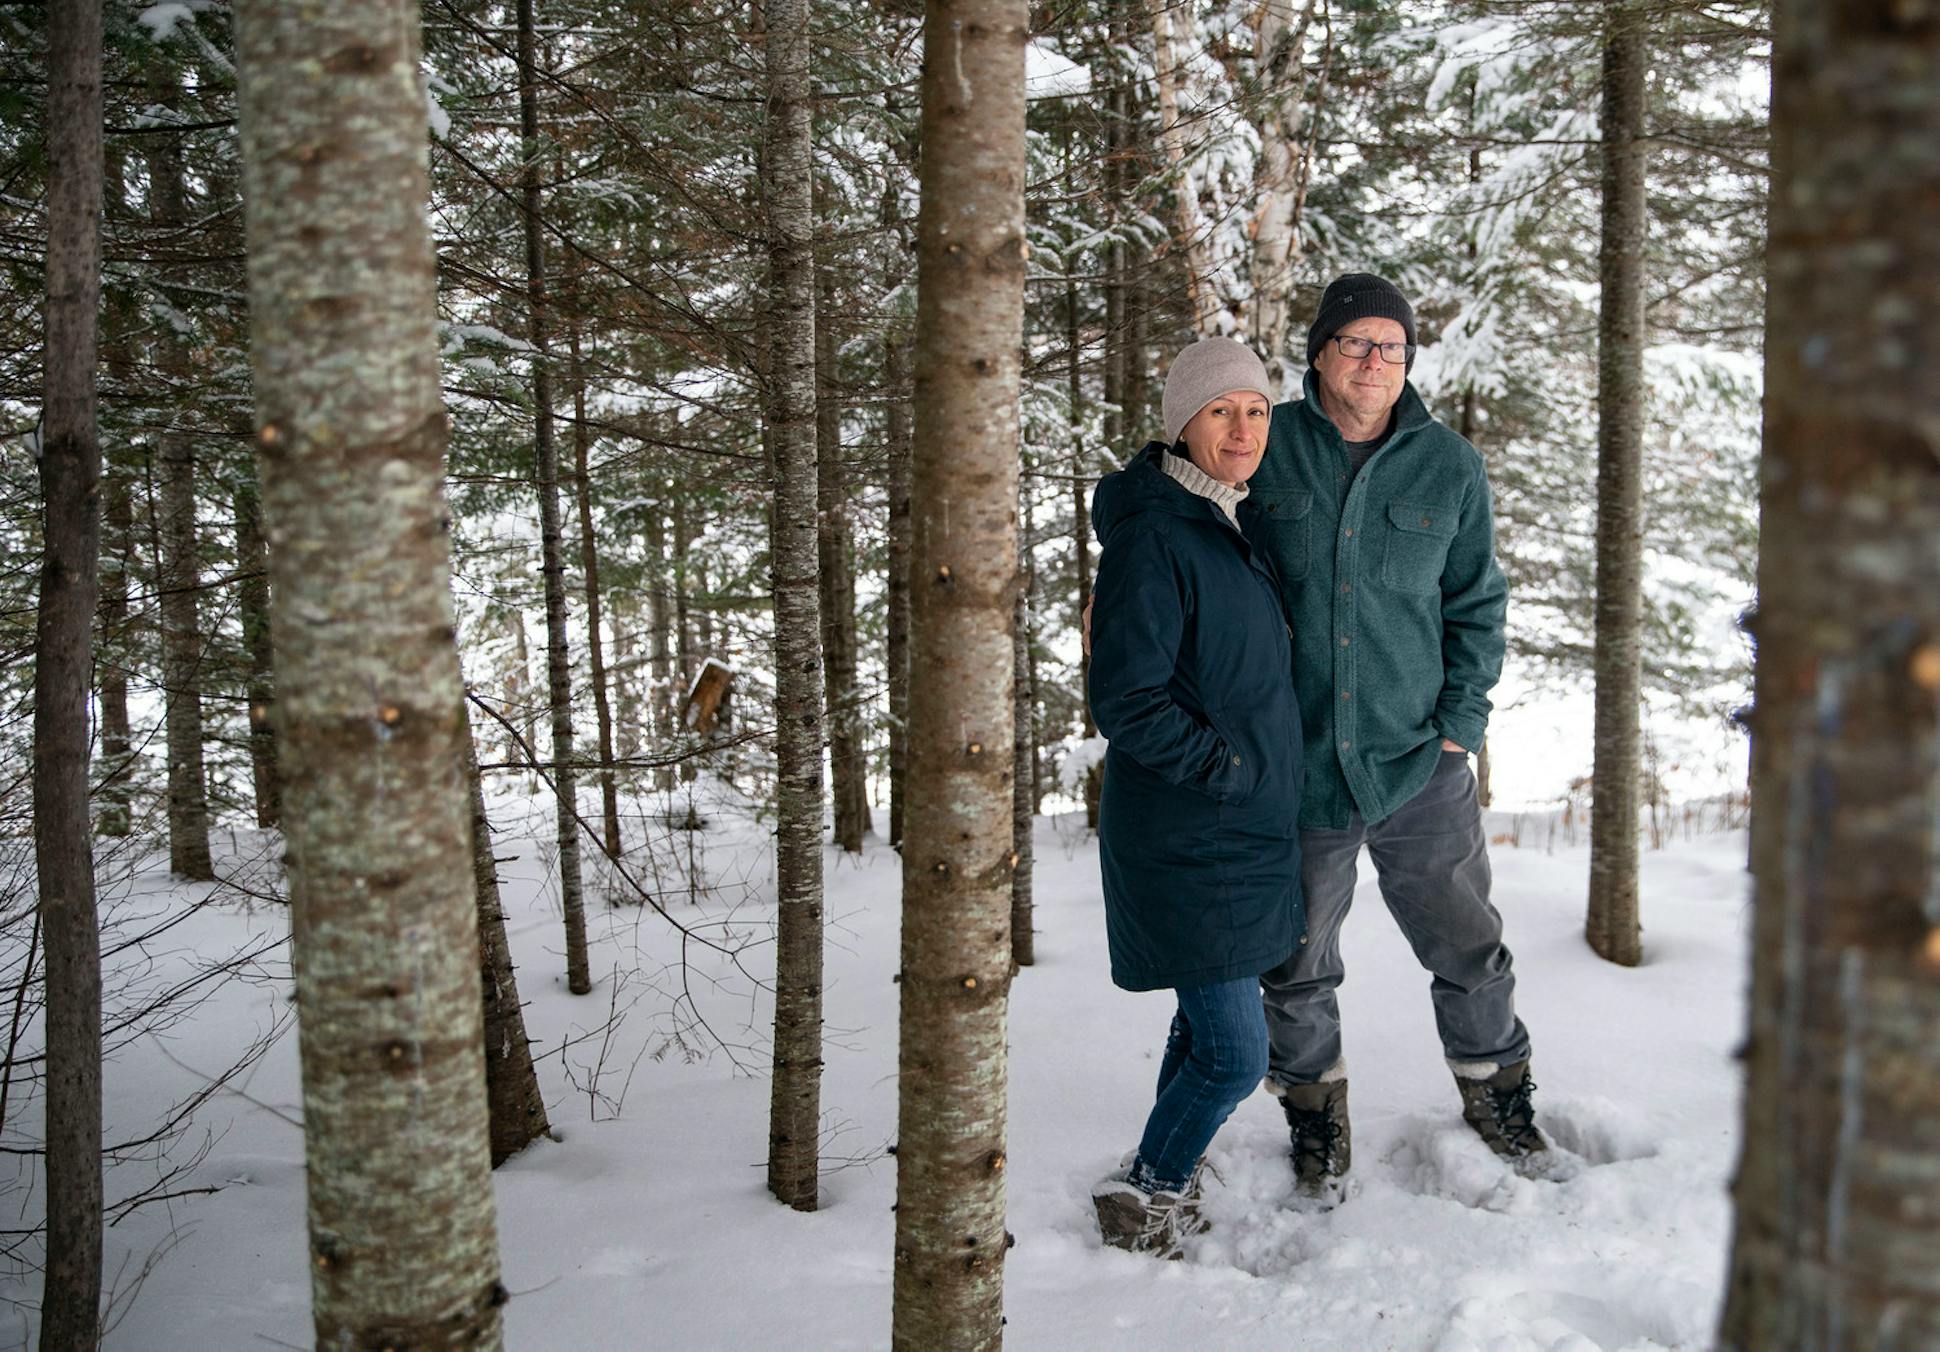 Barbara Platnick and Dave Kregness moved from Plymouth to a year-round home up the Gunflint Trail, knowing Kregness would have the high-speed internet needed to continue working.